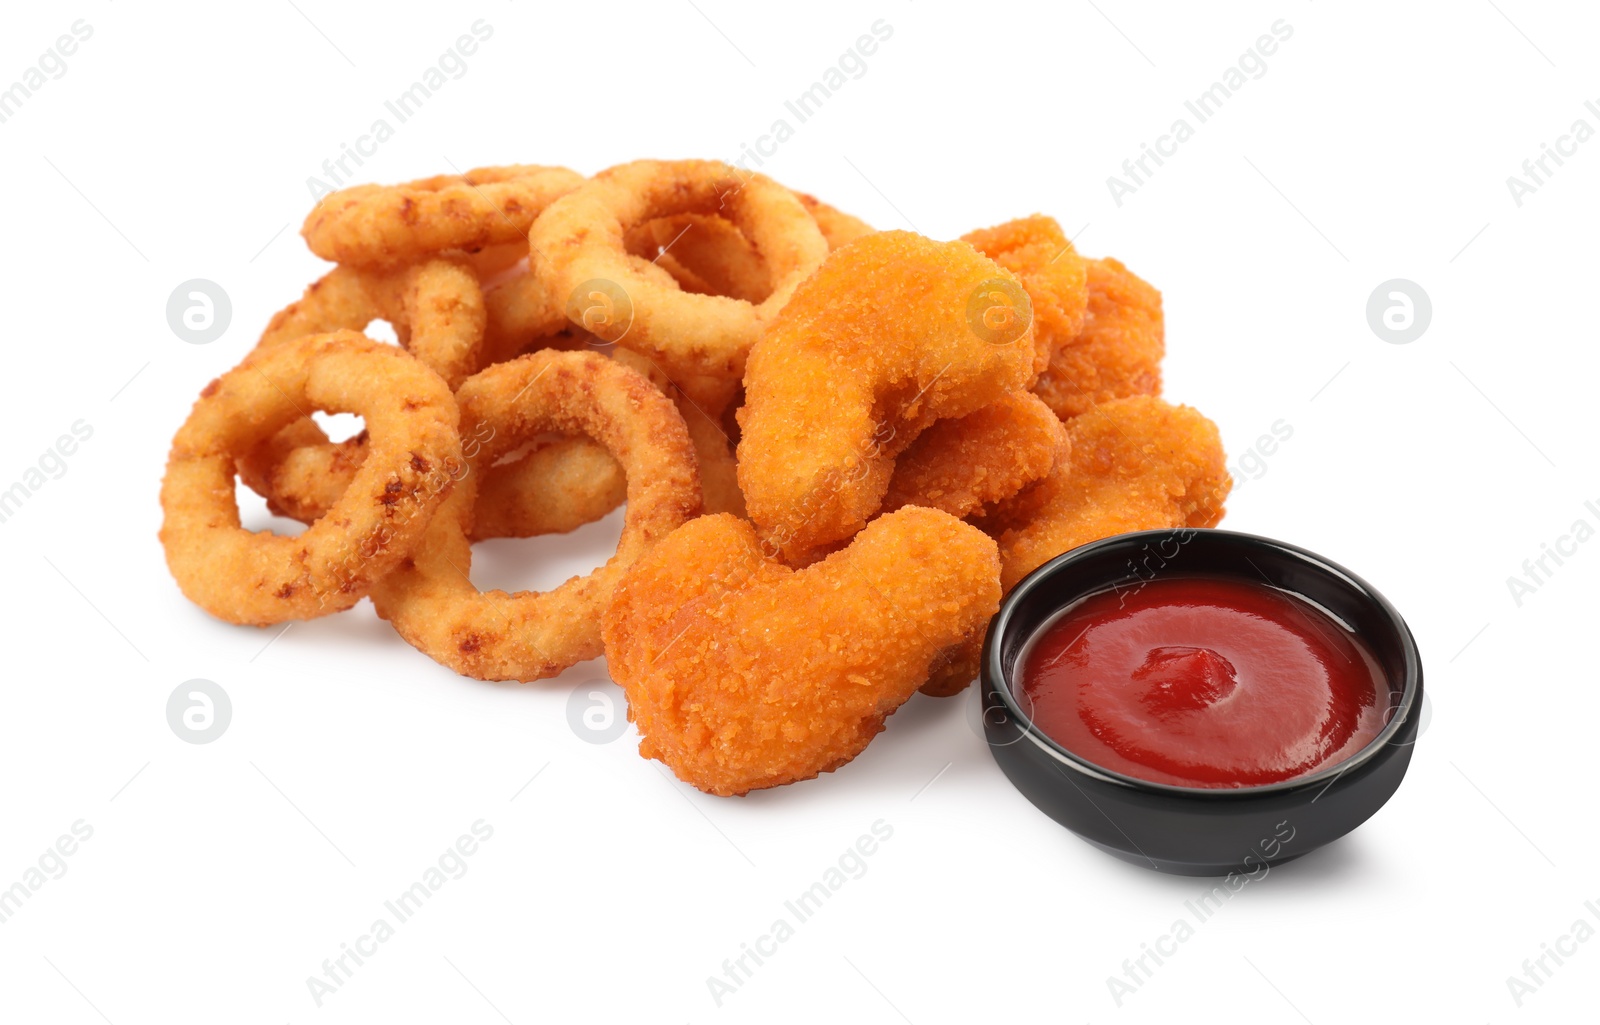 Photo of Tasty fried onion rings, chicken nuggets and ketchup on white background